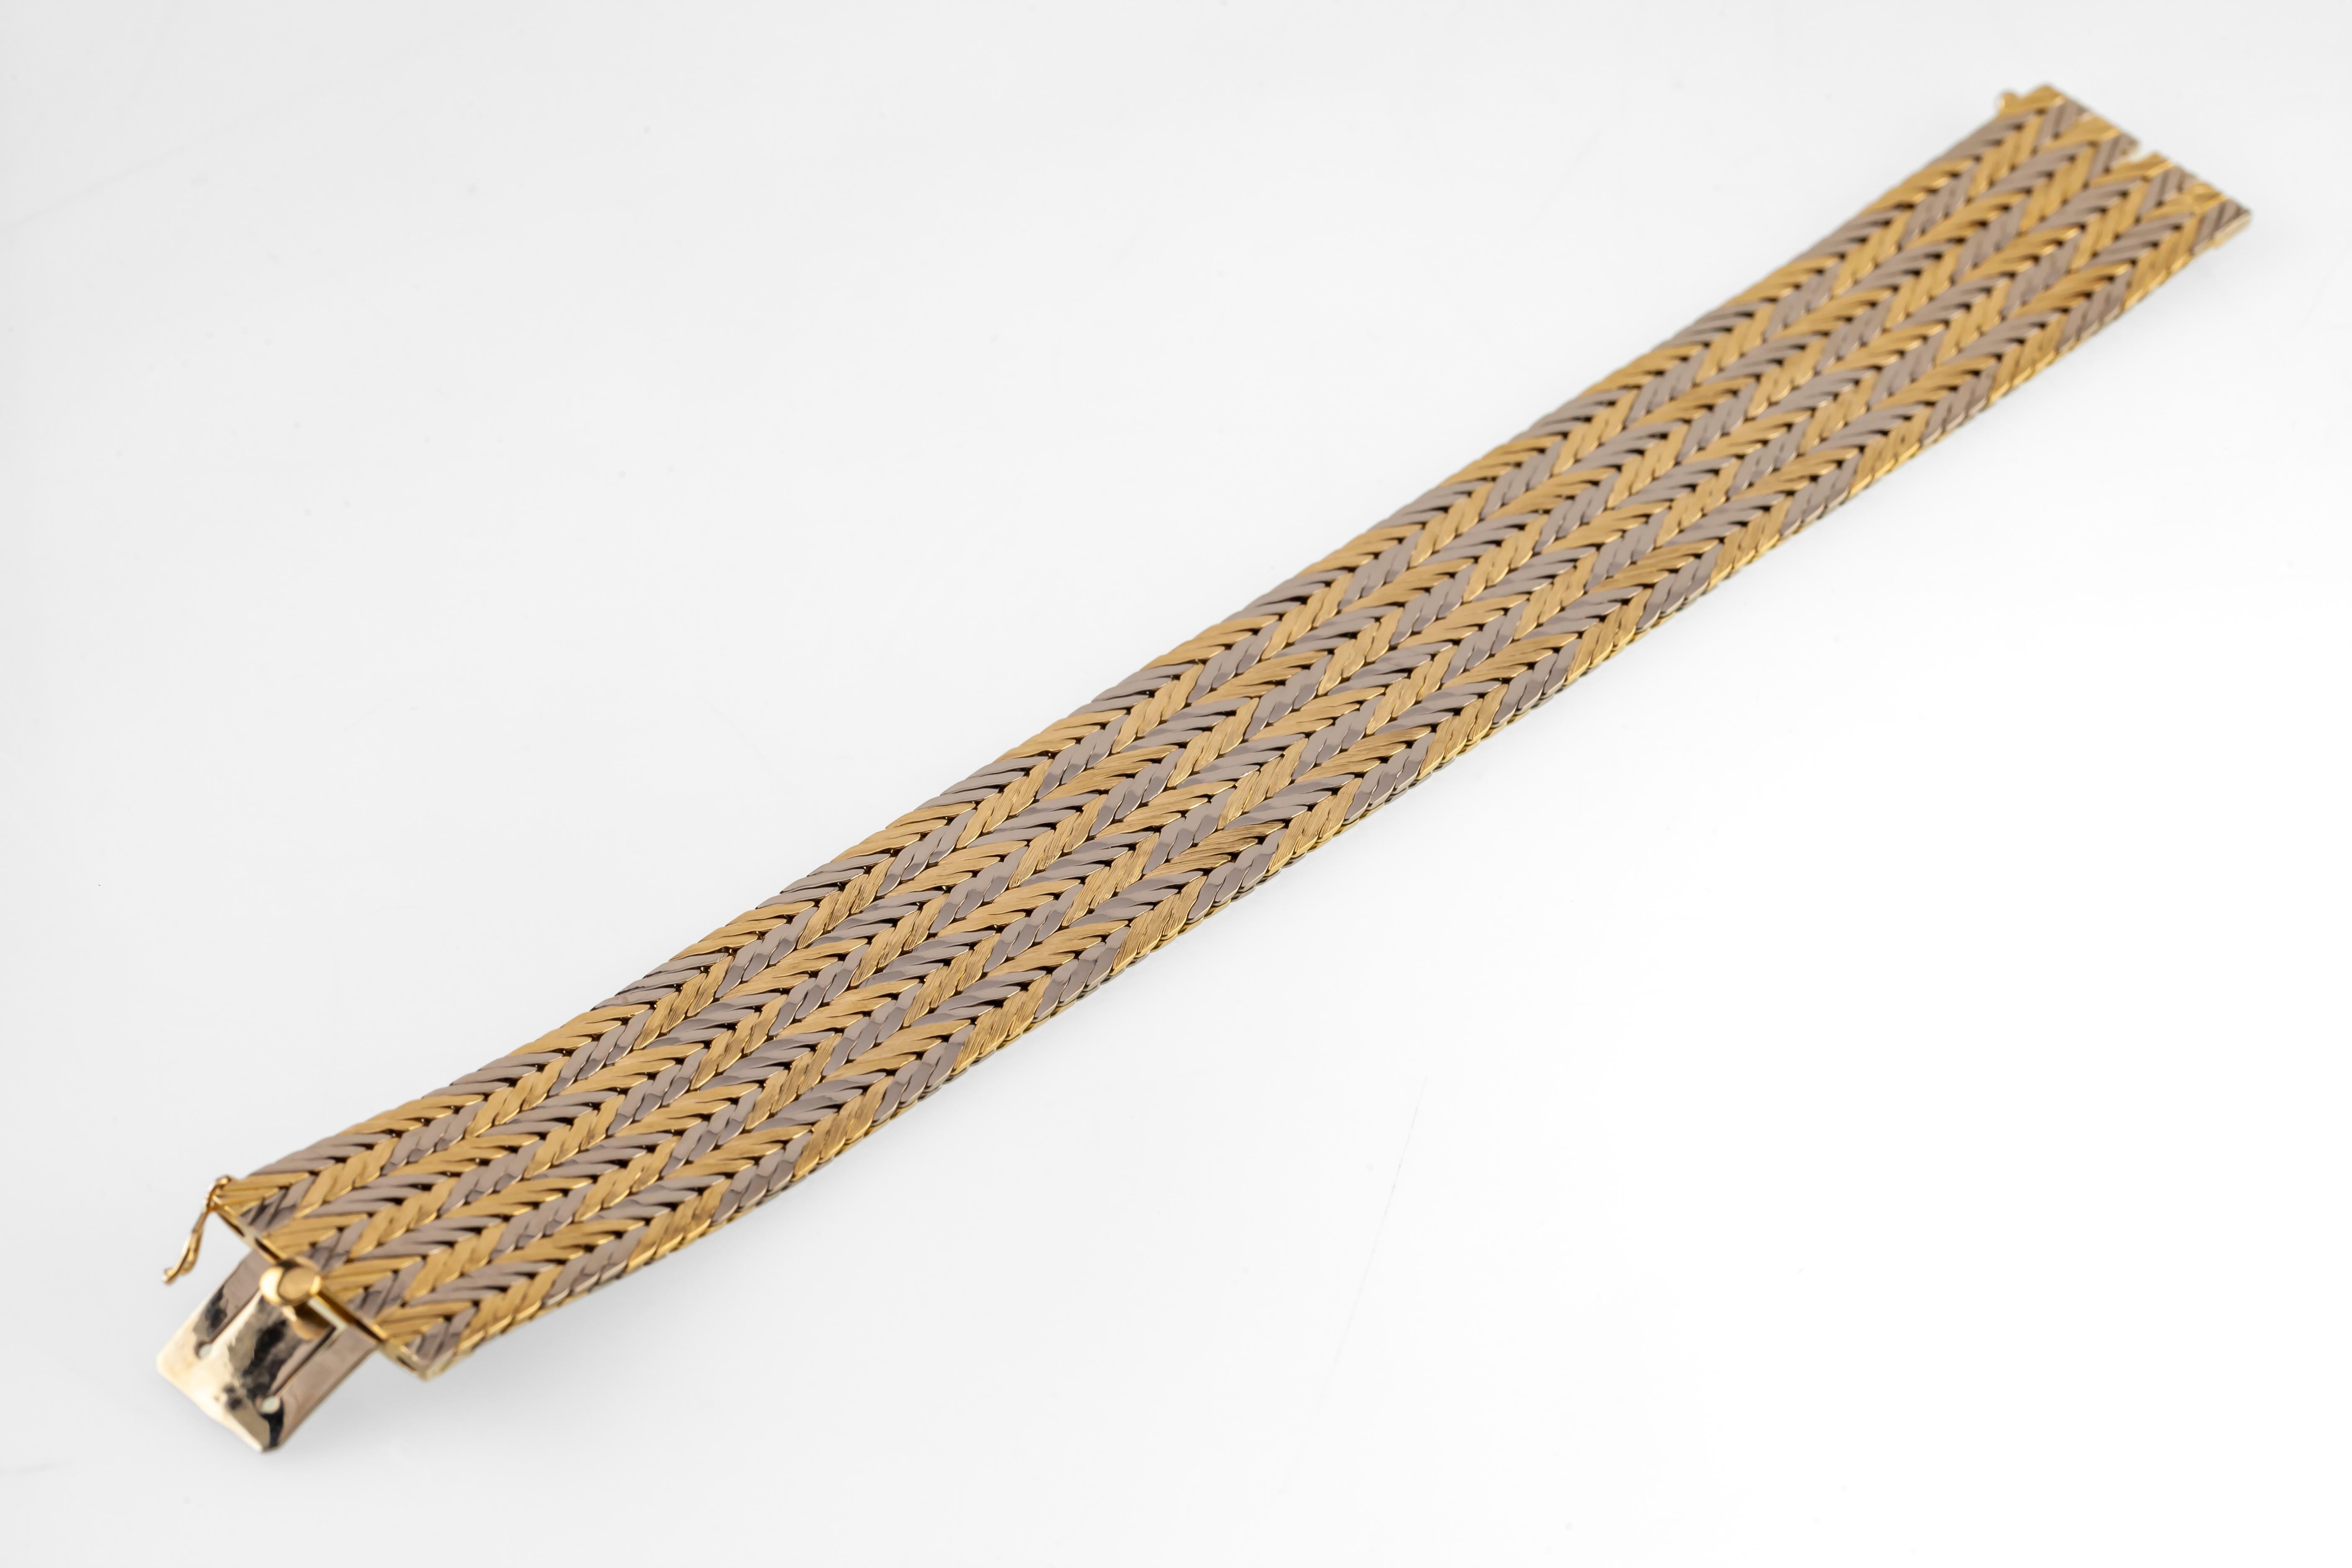 Gorgeous Gubelin 18k Two-Tone Gold Bracelet
Bands of Yellow and White Gold Intersect to form a Checkerboard Chevron Pattern
Total Length of Bracelet = 7.25